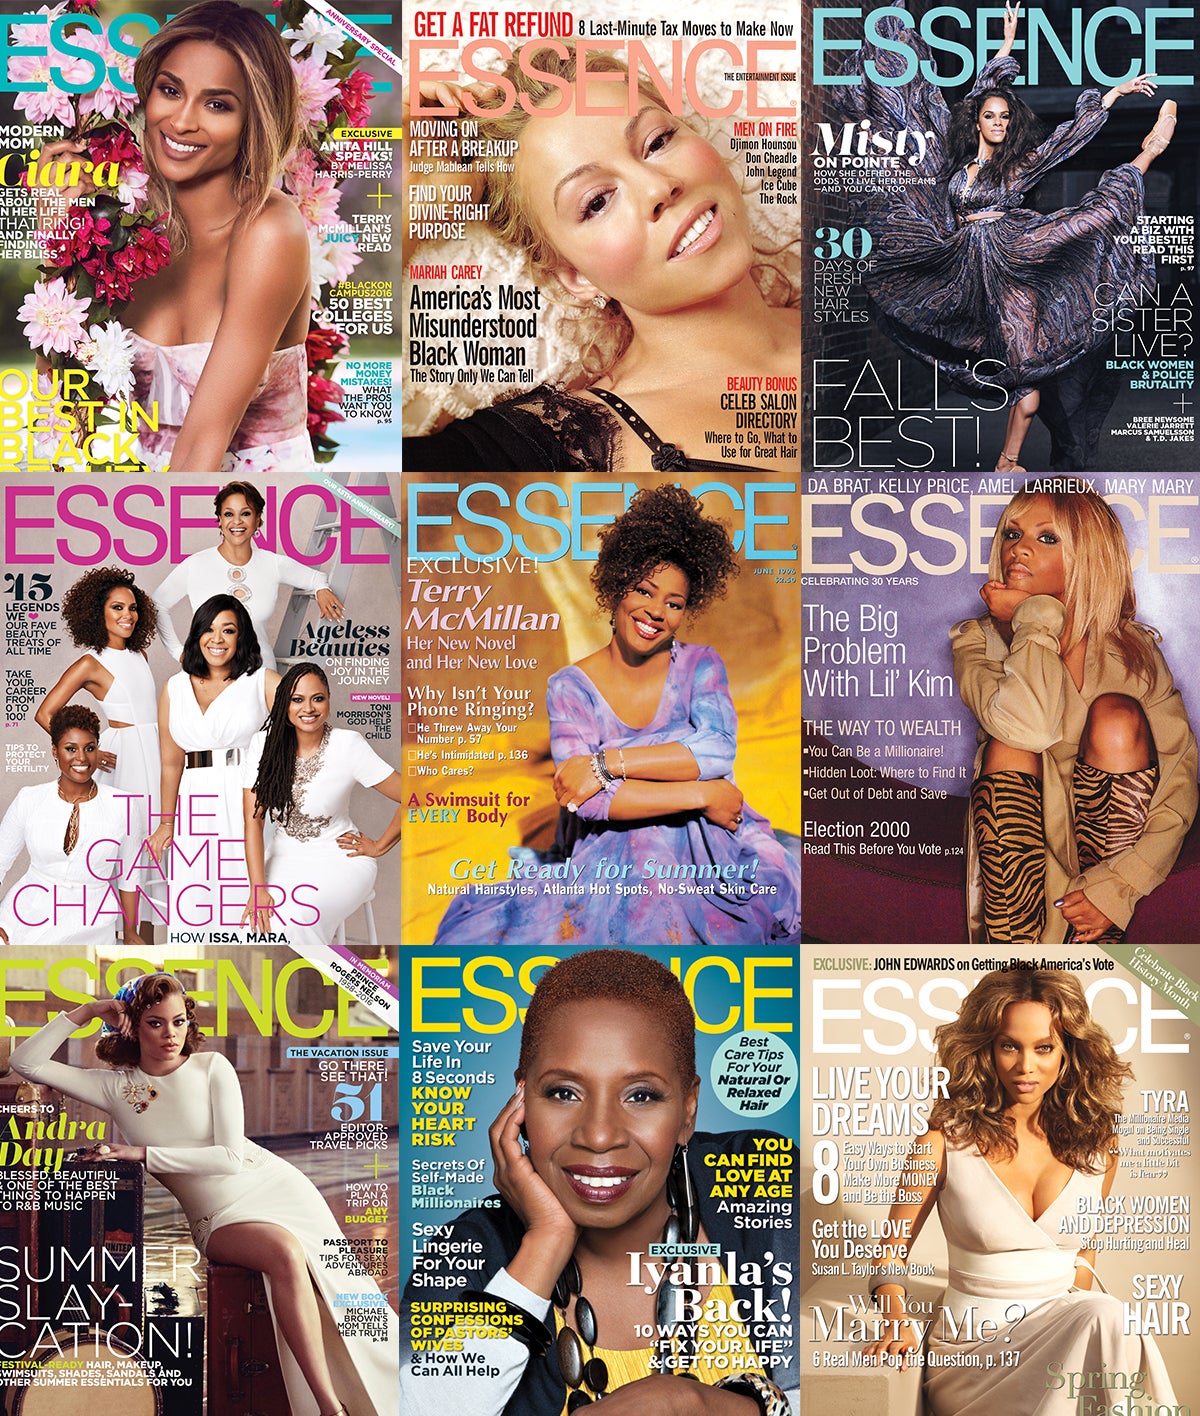 Throwback Thursday: ESSENCE Festival 2016 Artists' Past ESSENCE Covers
